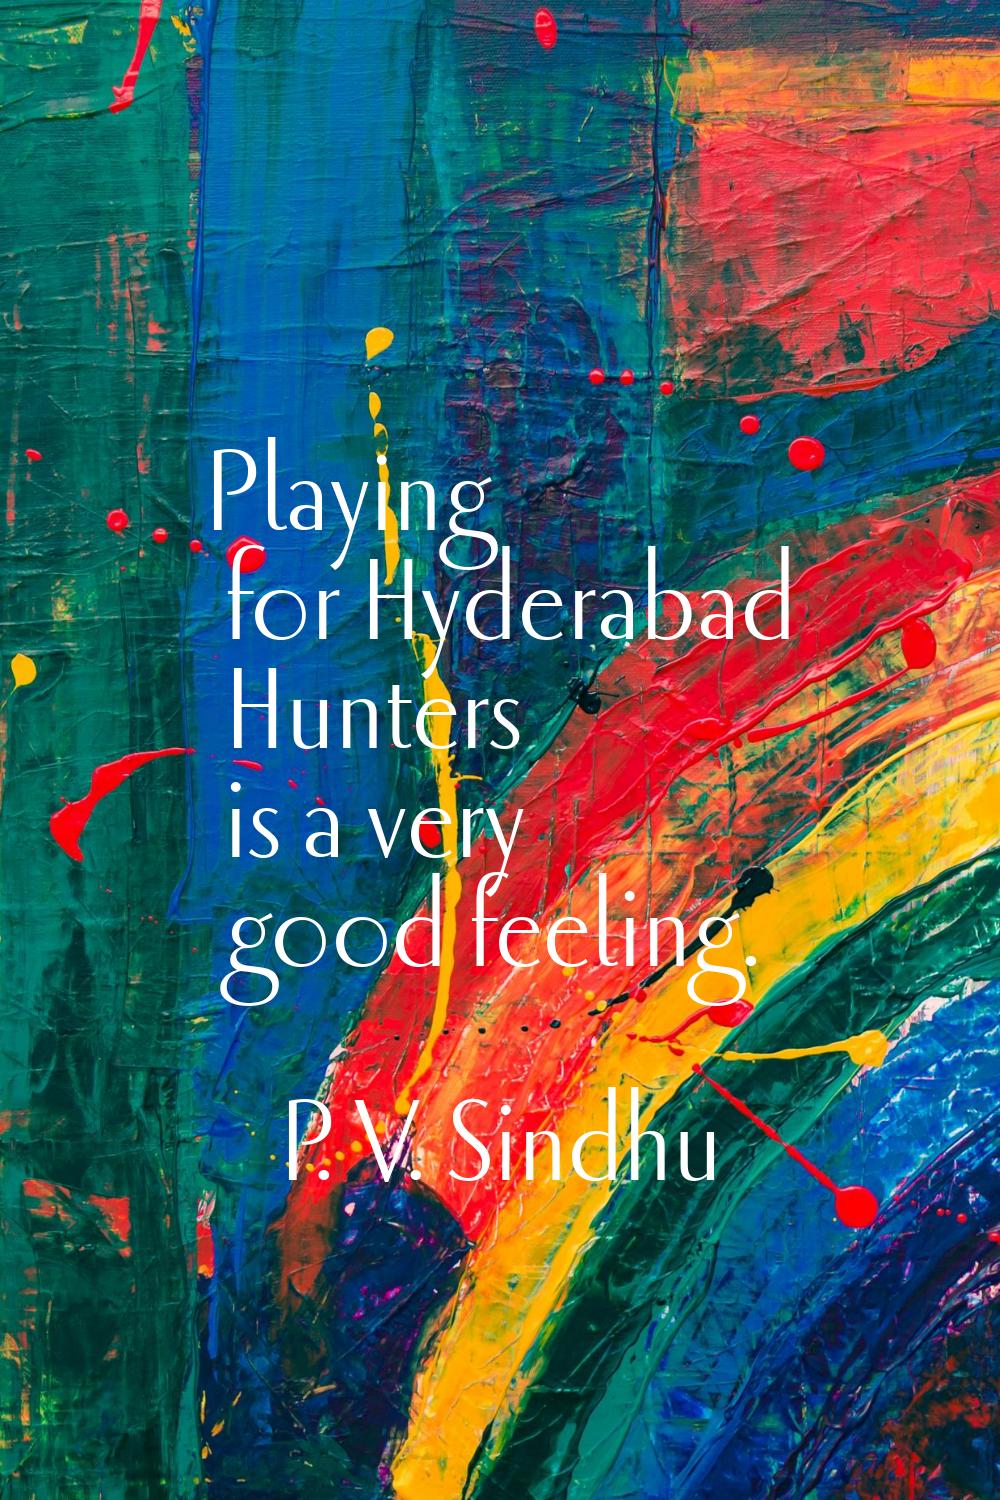 Playing for Hyderabad Hunters is a very good feeling.